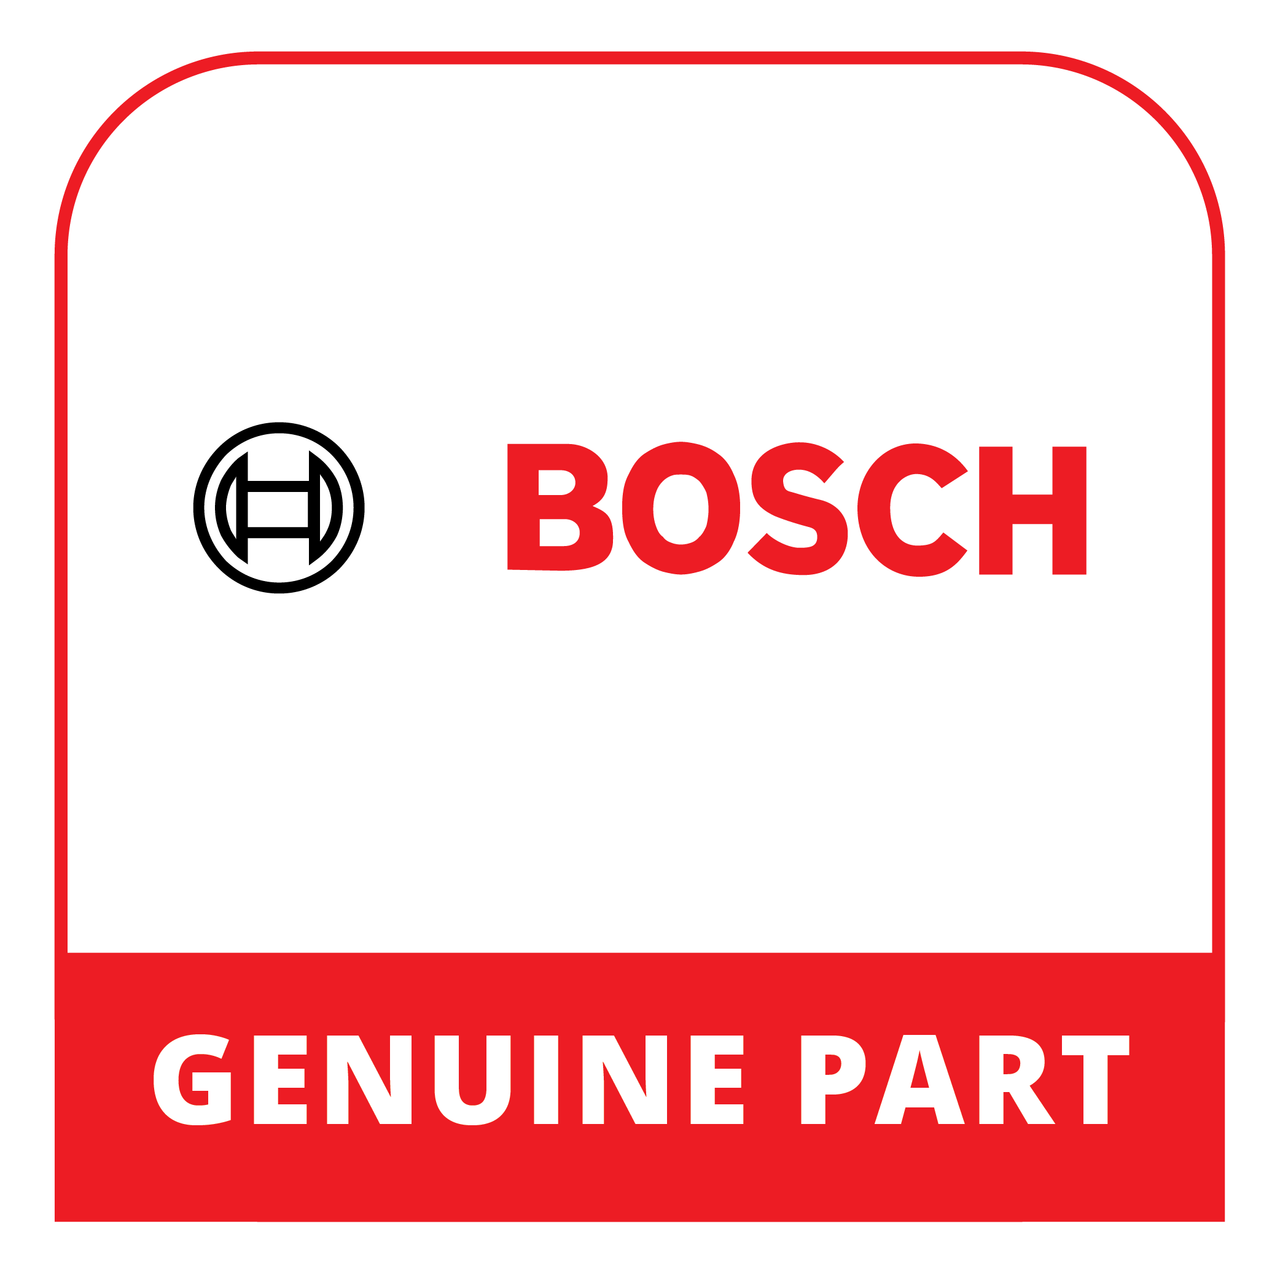 Bosch (Thermador) 11056418 - Panel Frame - Genuine Bosch (Thermador) Part